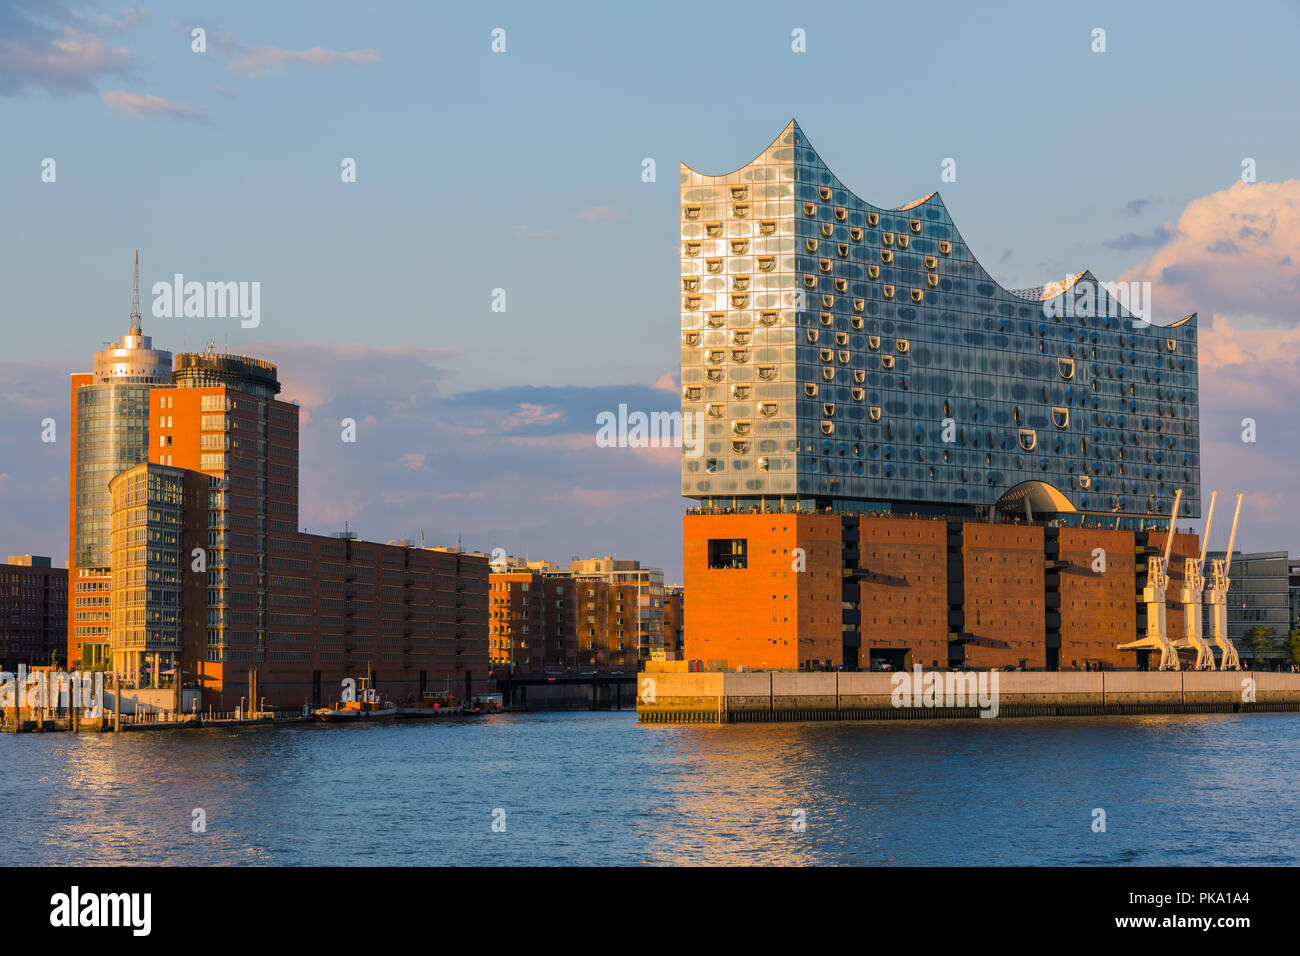 The Elbphilharmonie (Elbe Philharmonic Hall) is a concert hall in the HafenCity quarter of Hamburg, Germany, on the peninsula of the Elbe River. It is Stock Photo